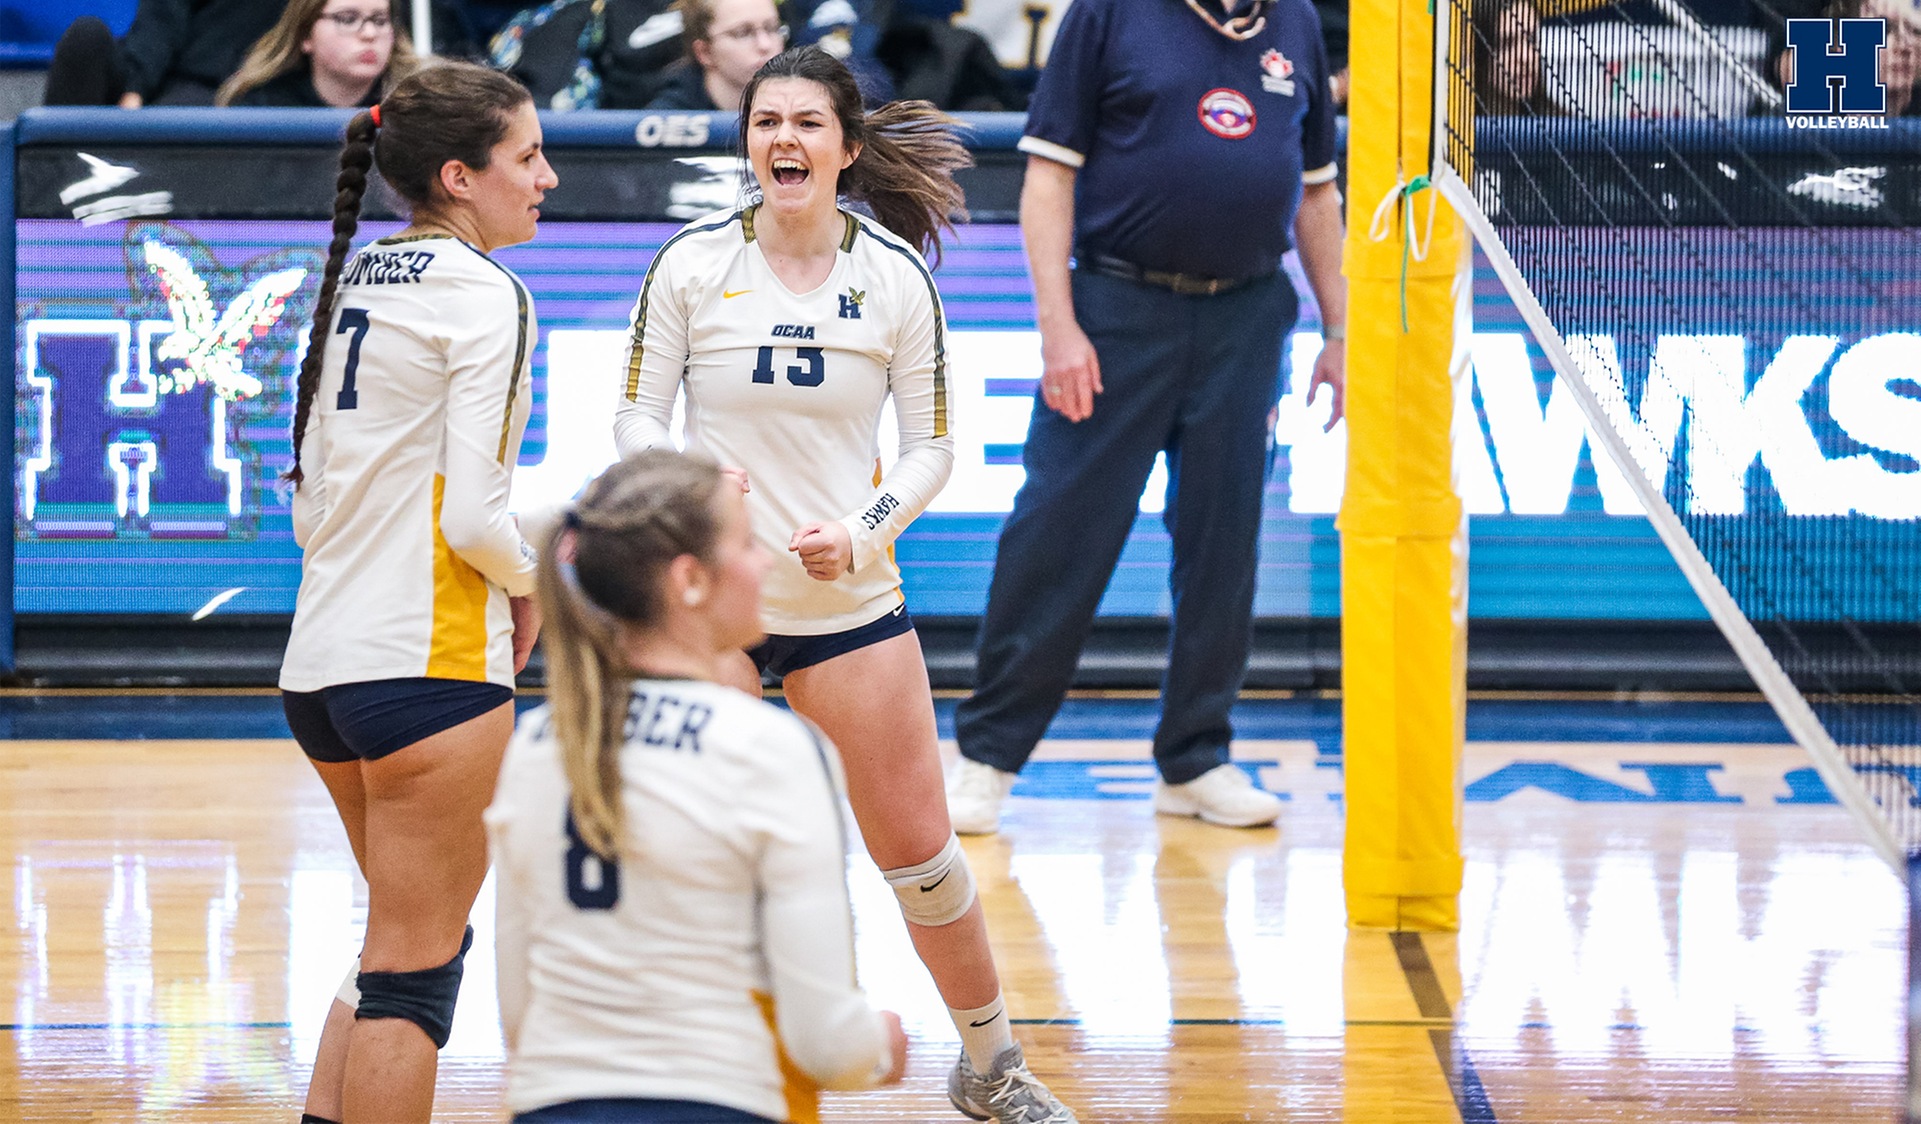 Women's Volleyball Makes Quick Work of Boréal